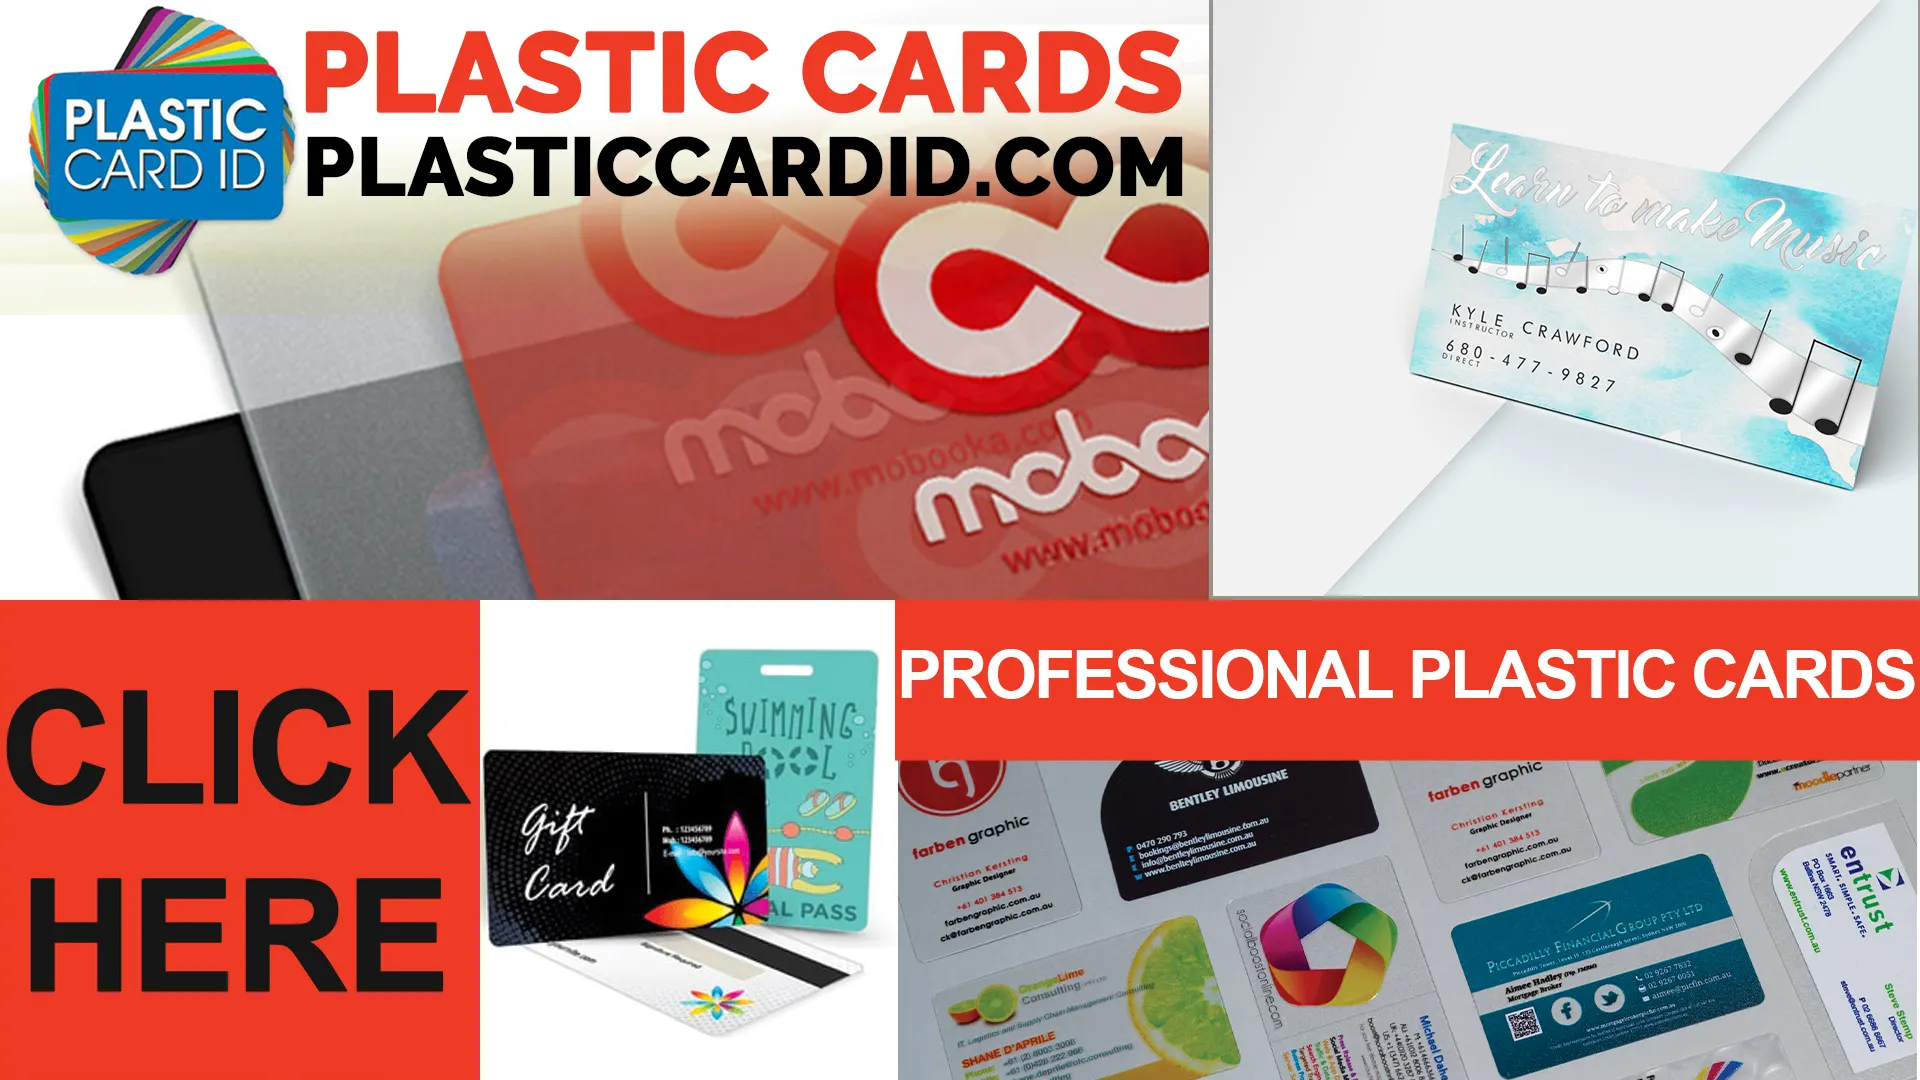 Welcome to the Path of Financial Guidance for Your Plastic Card Project 